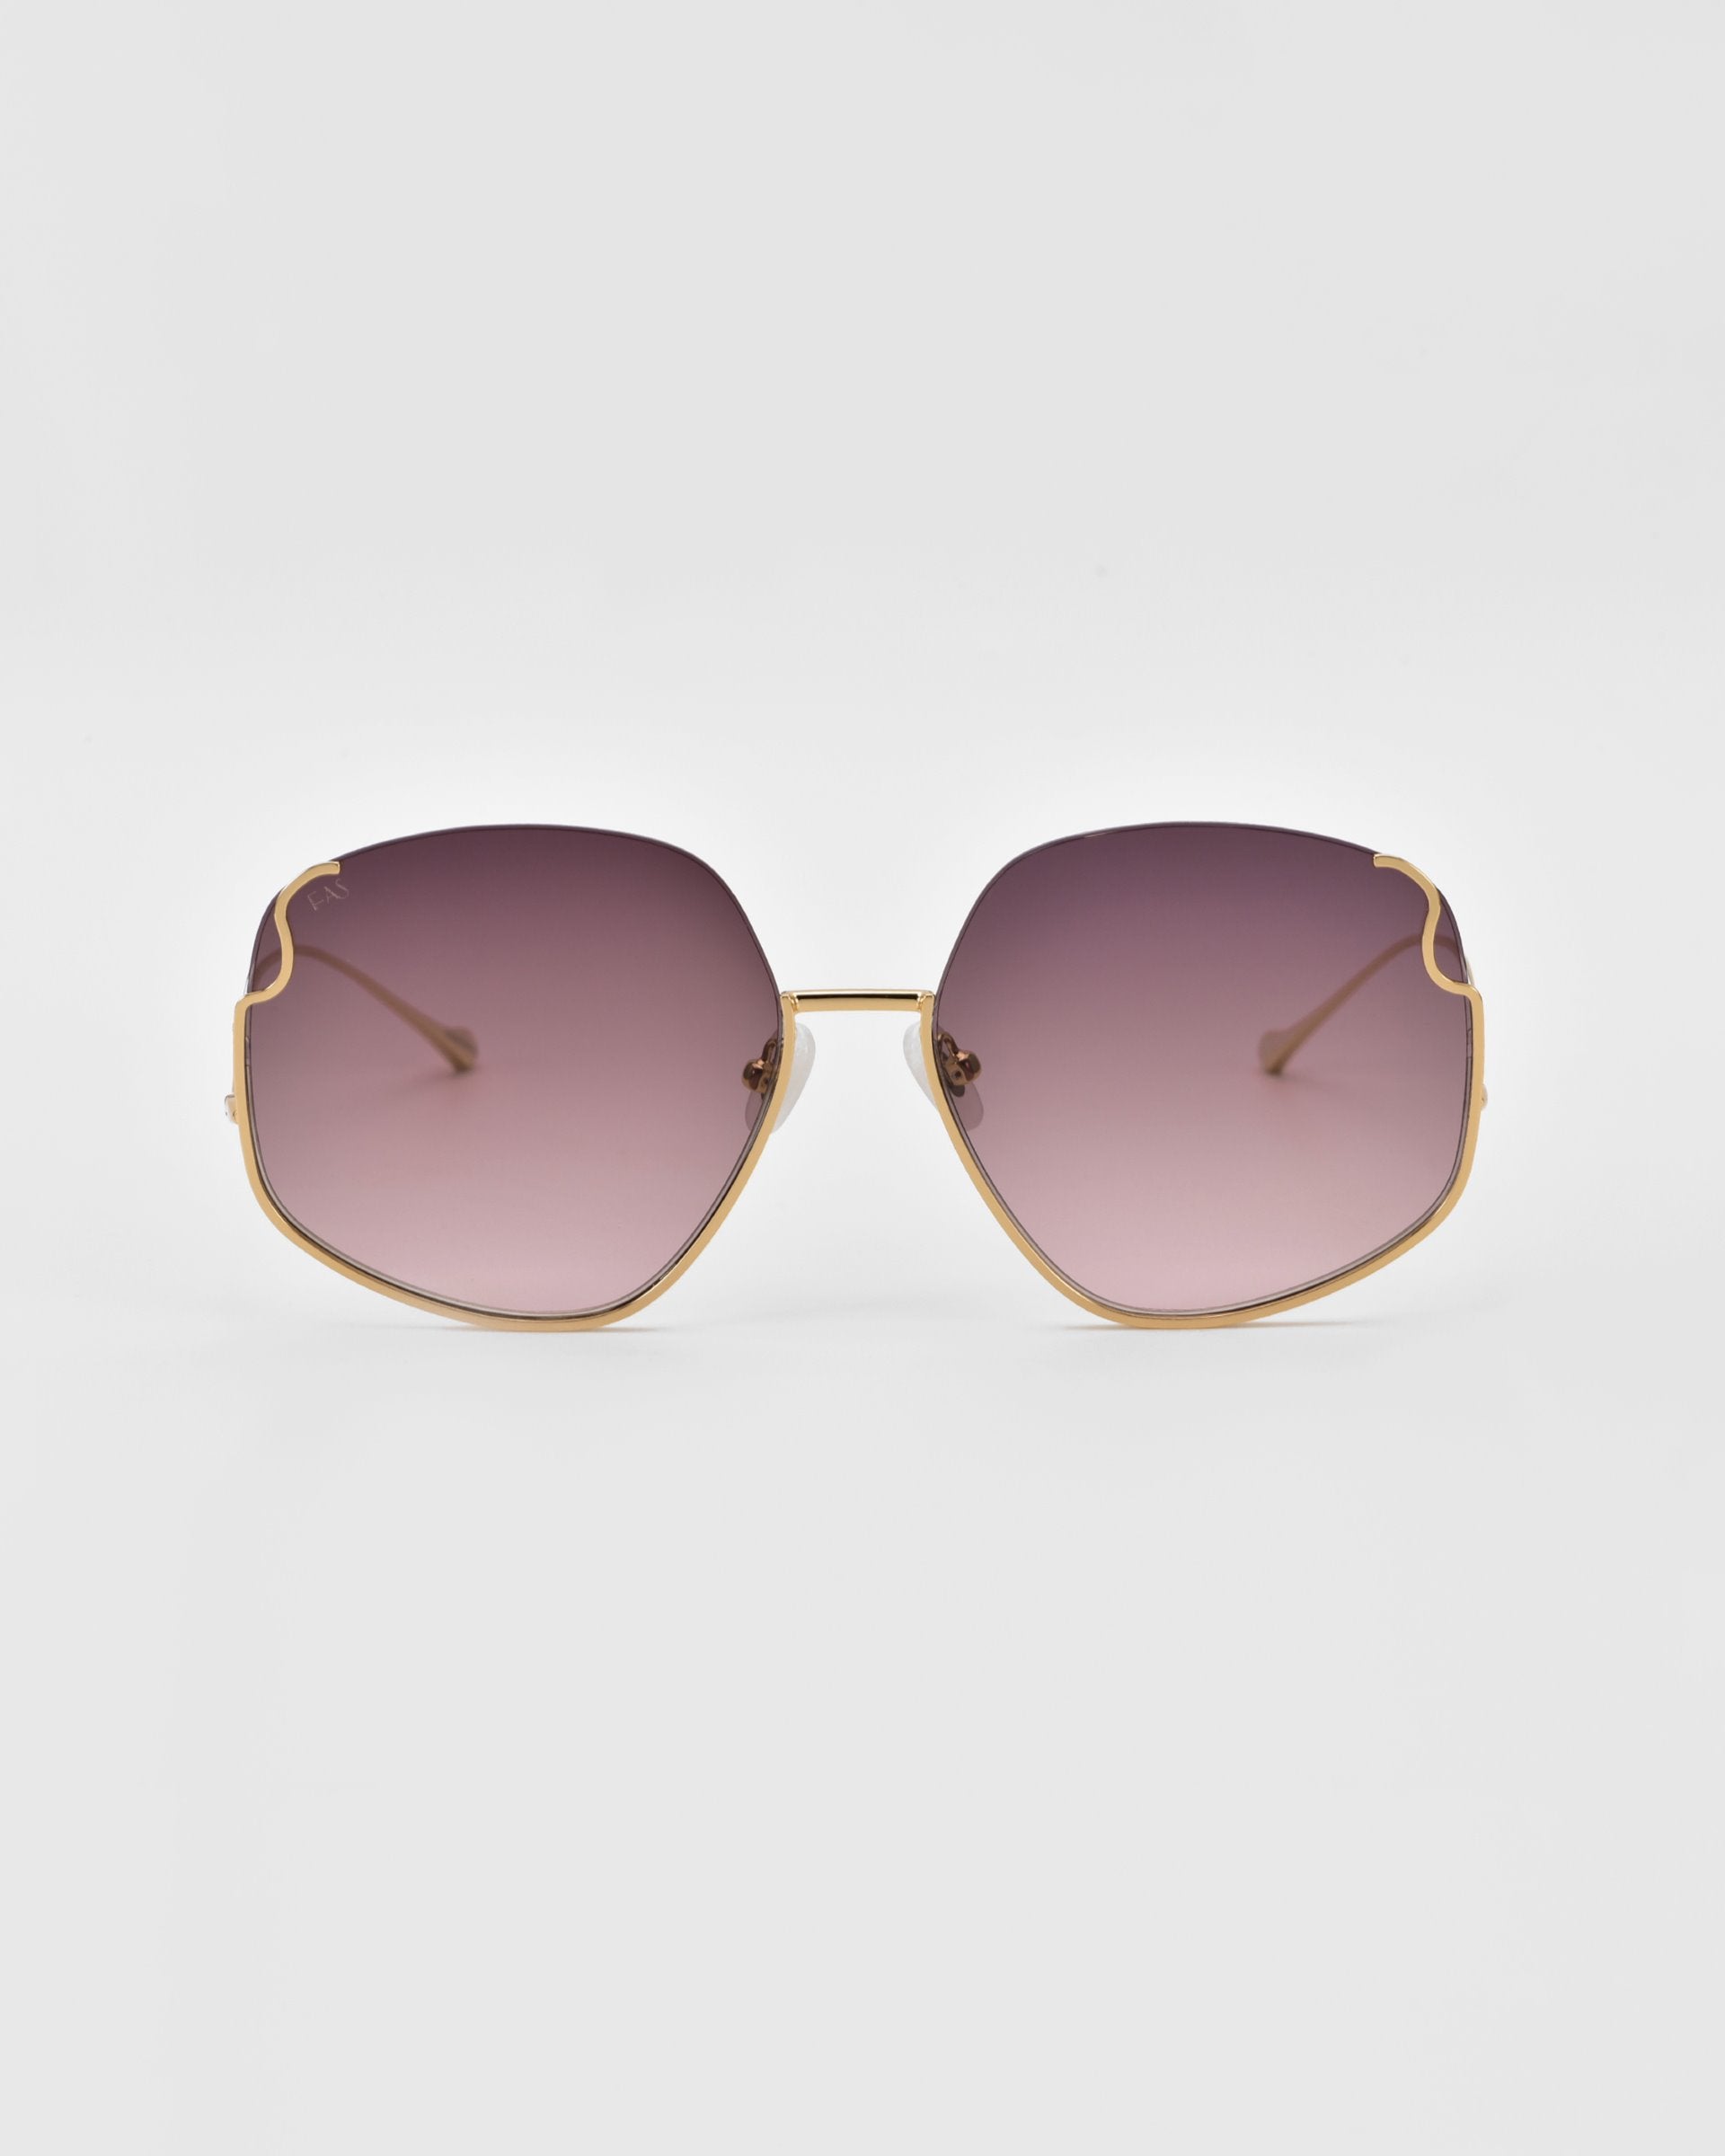 A pair of luxurious Drape sunglasses by For Art&#39;s Sake® with large, hexagonal lenses featuring a gradient tint from dark purple at the top to lighter purple towards the center. The gold-colored frame showcases intricate metal detailing and thin, delicate arms.